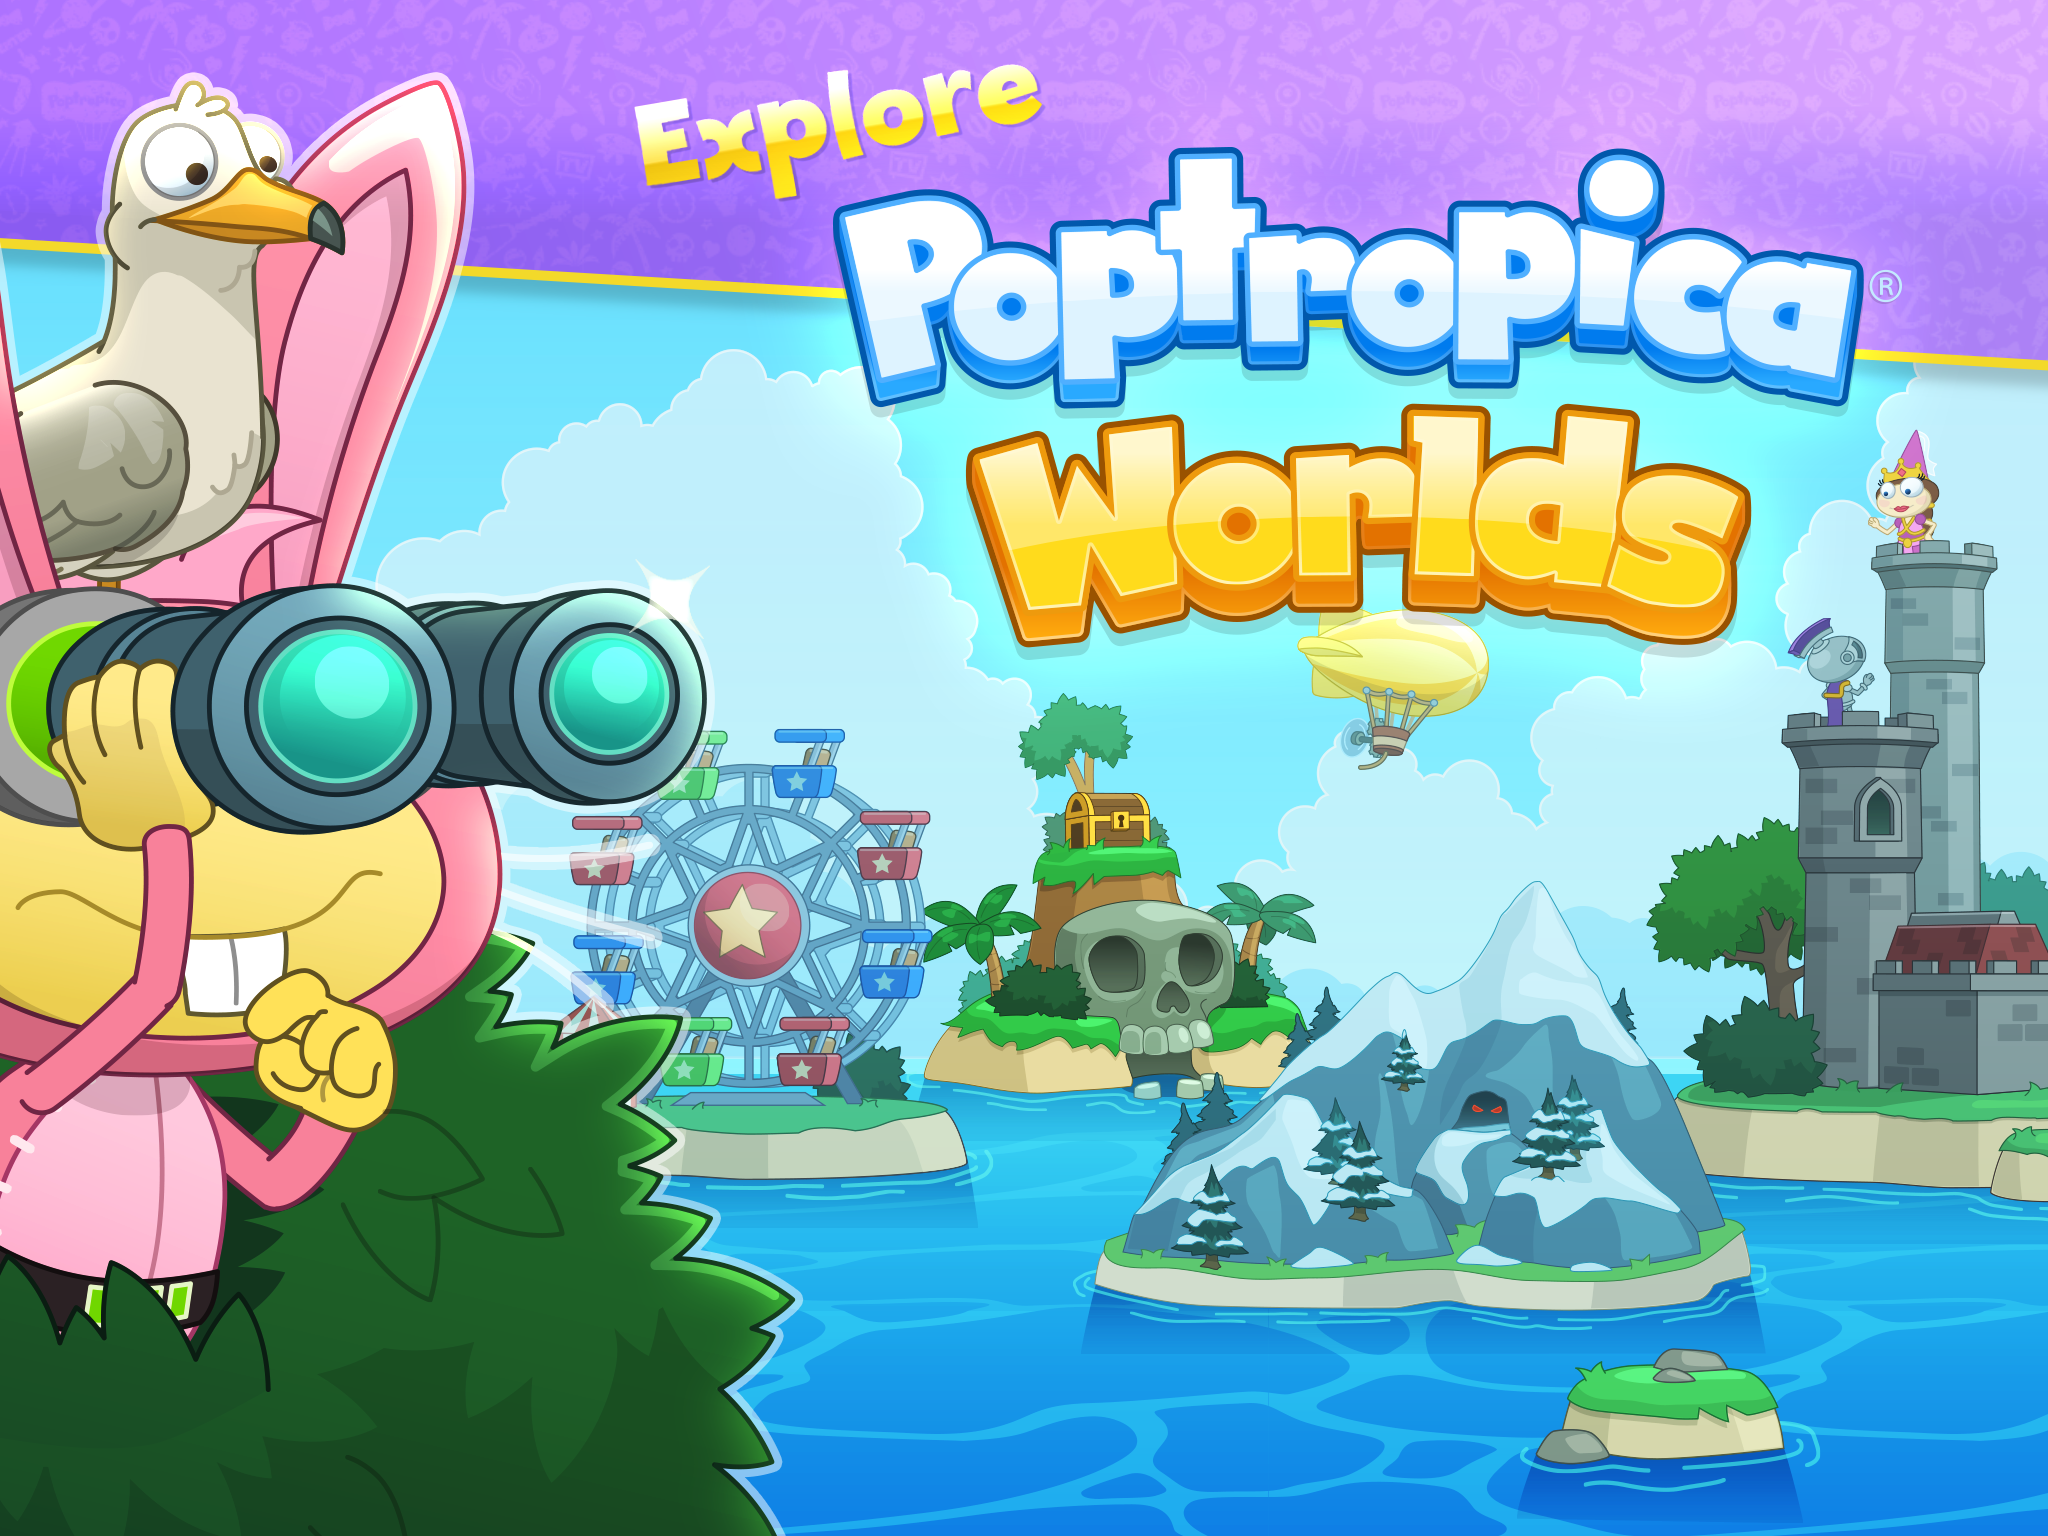 Poptropica Worlds is a unique adventure game